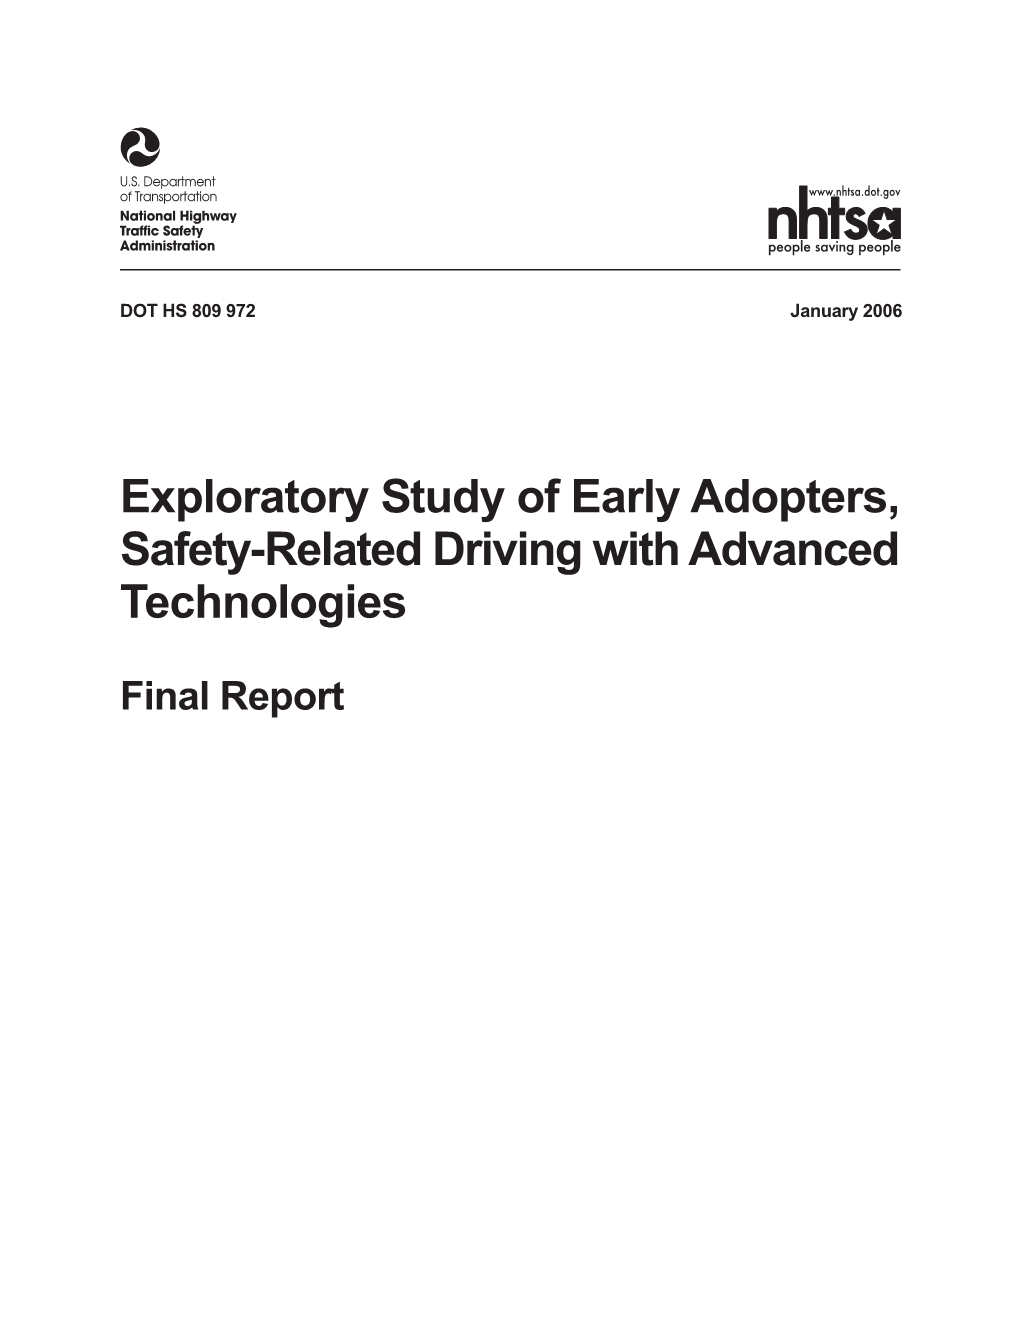 Exploratory Study of Early Adopters, Safety-Related Driving with Advanced Technologies